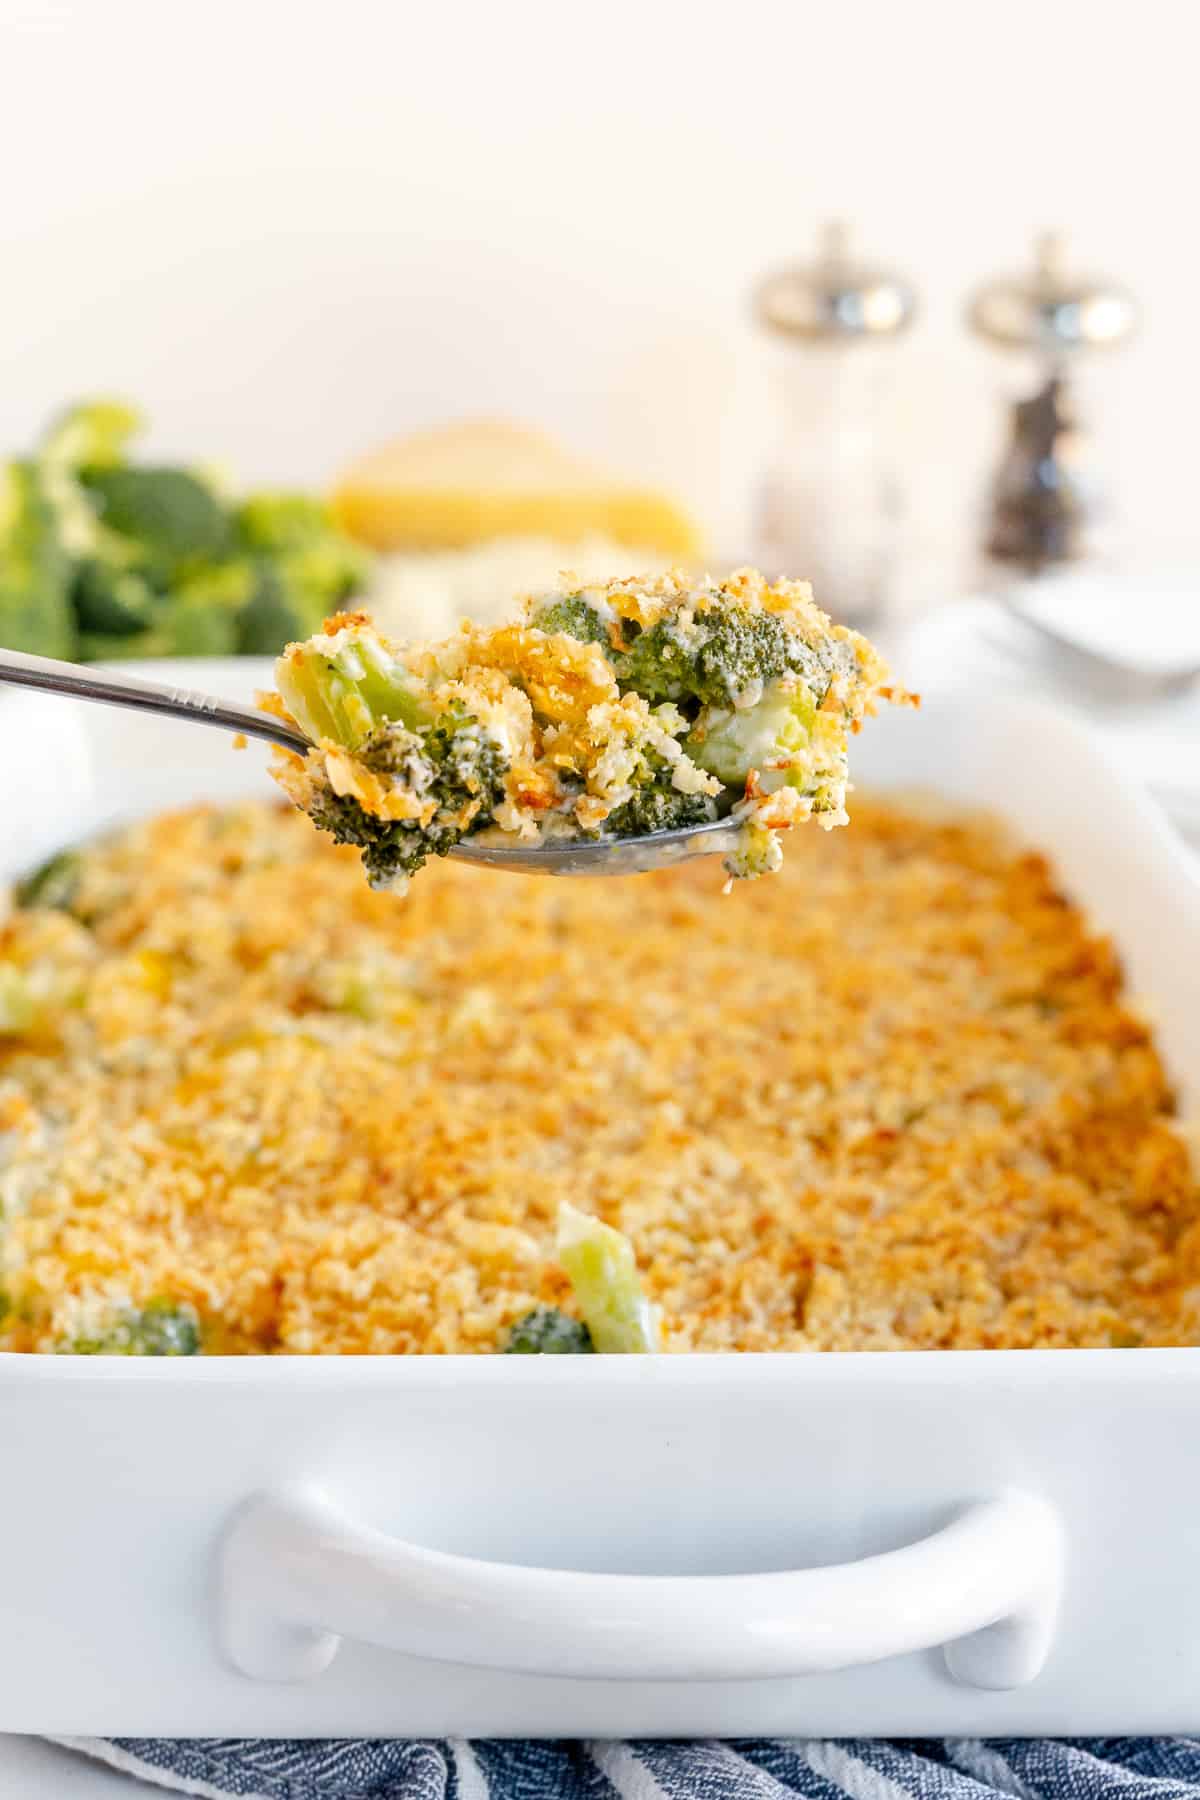 A spoon scoops up some broccoli and pearl onion casserole from a baking dish.